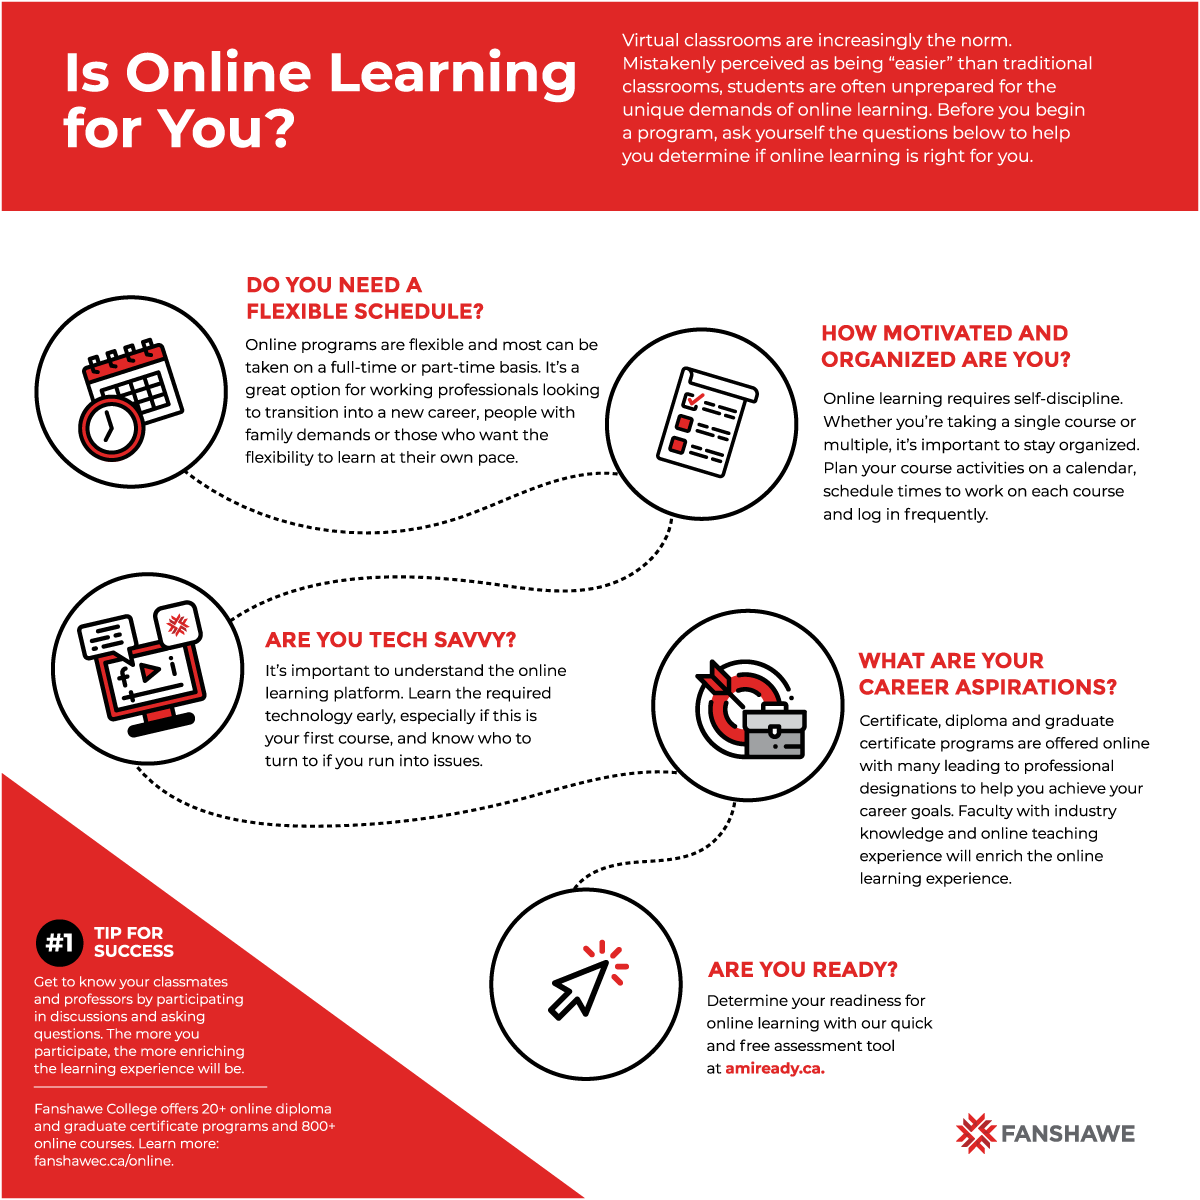 INFOGRAPHIC: Is Online Learning for You?